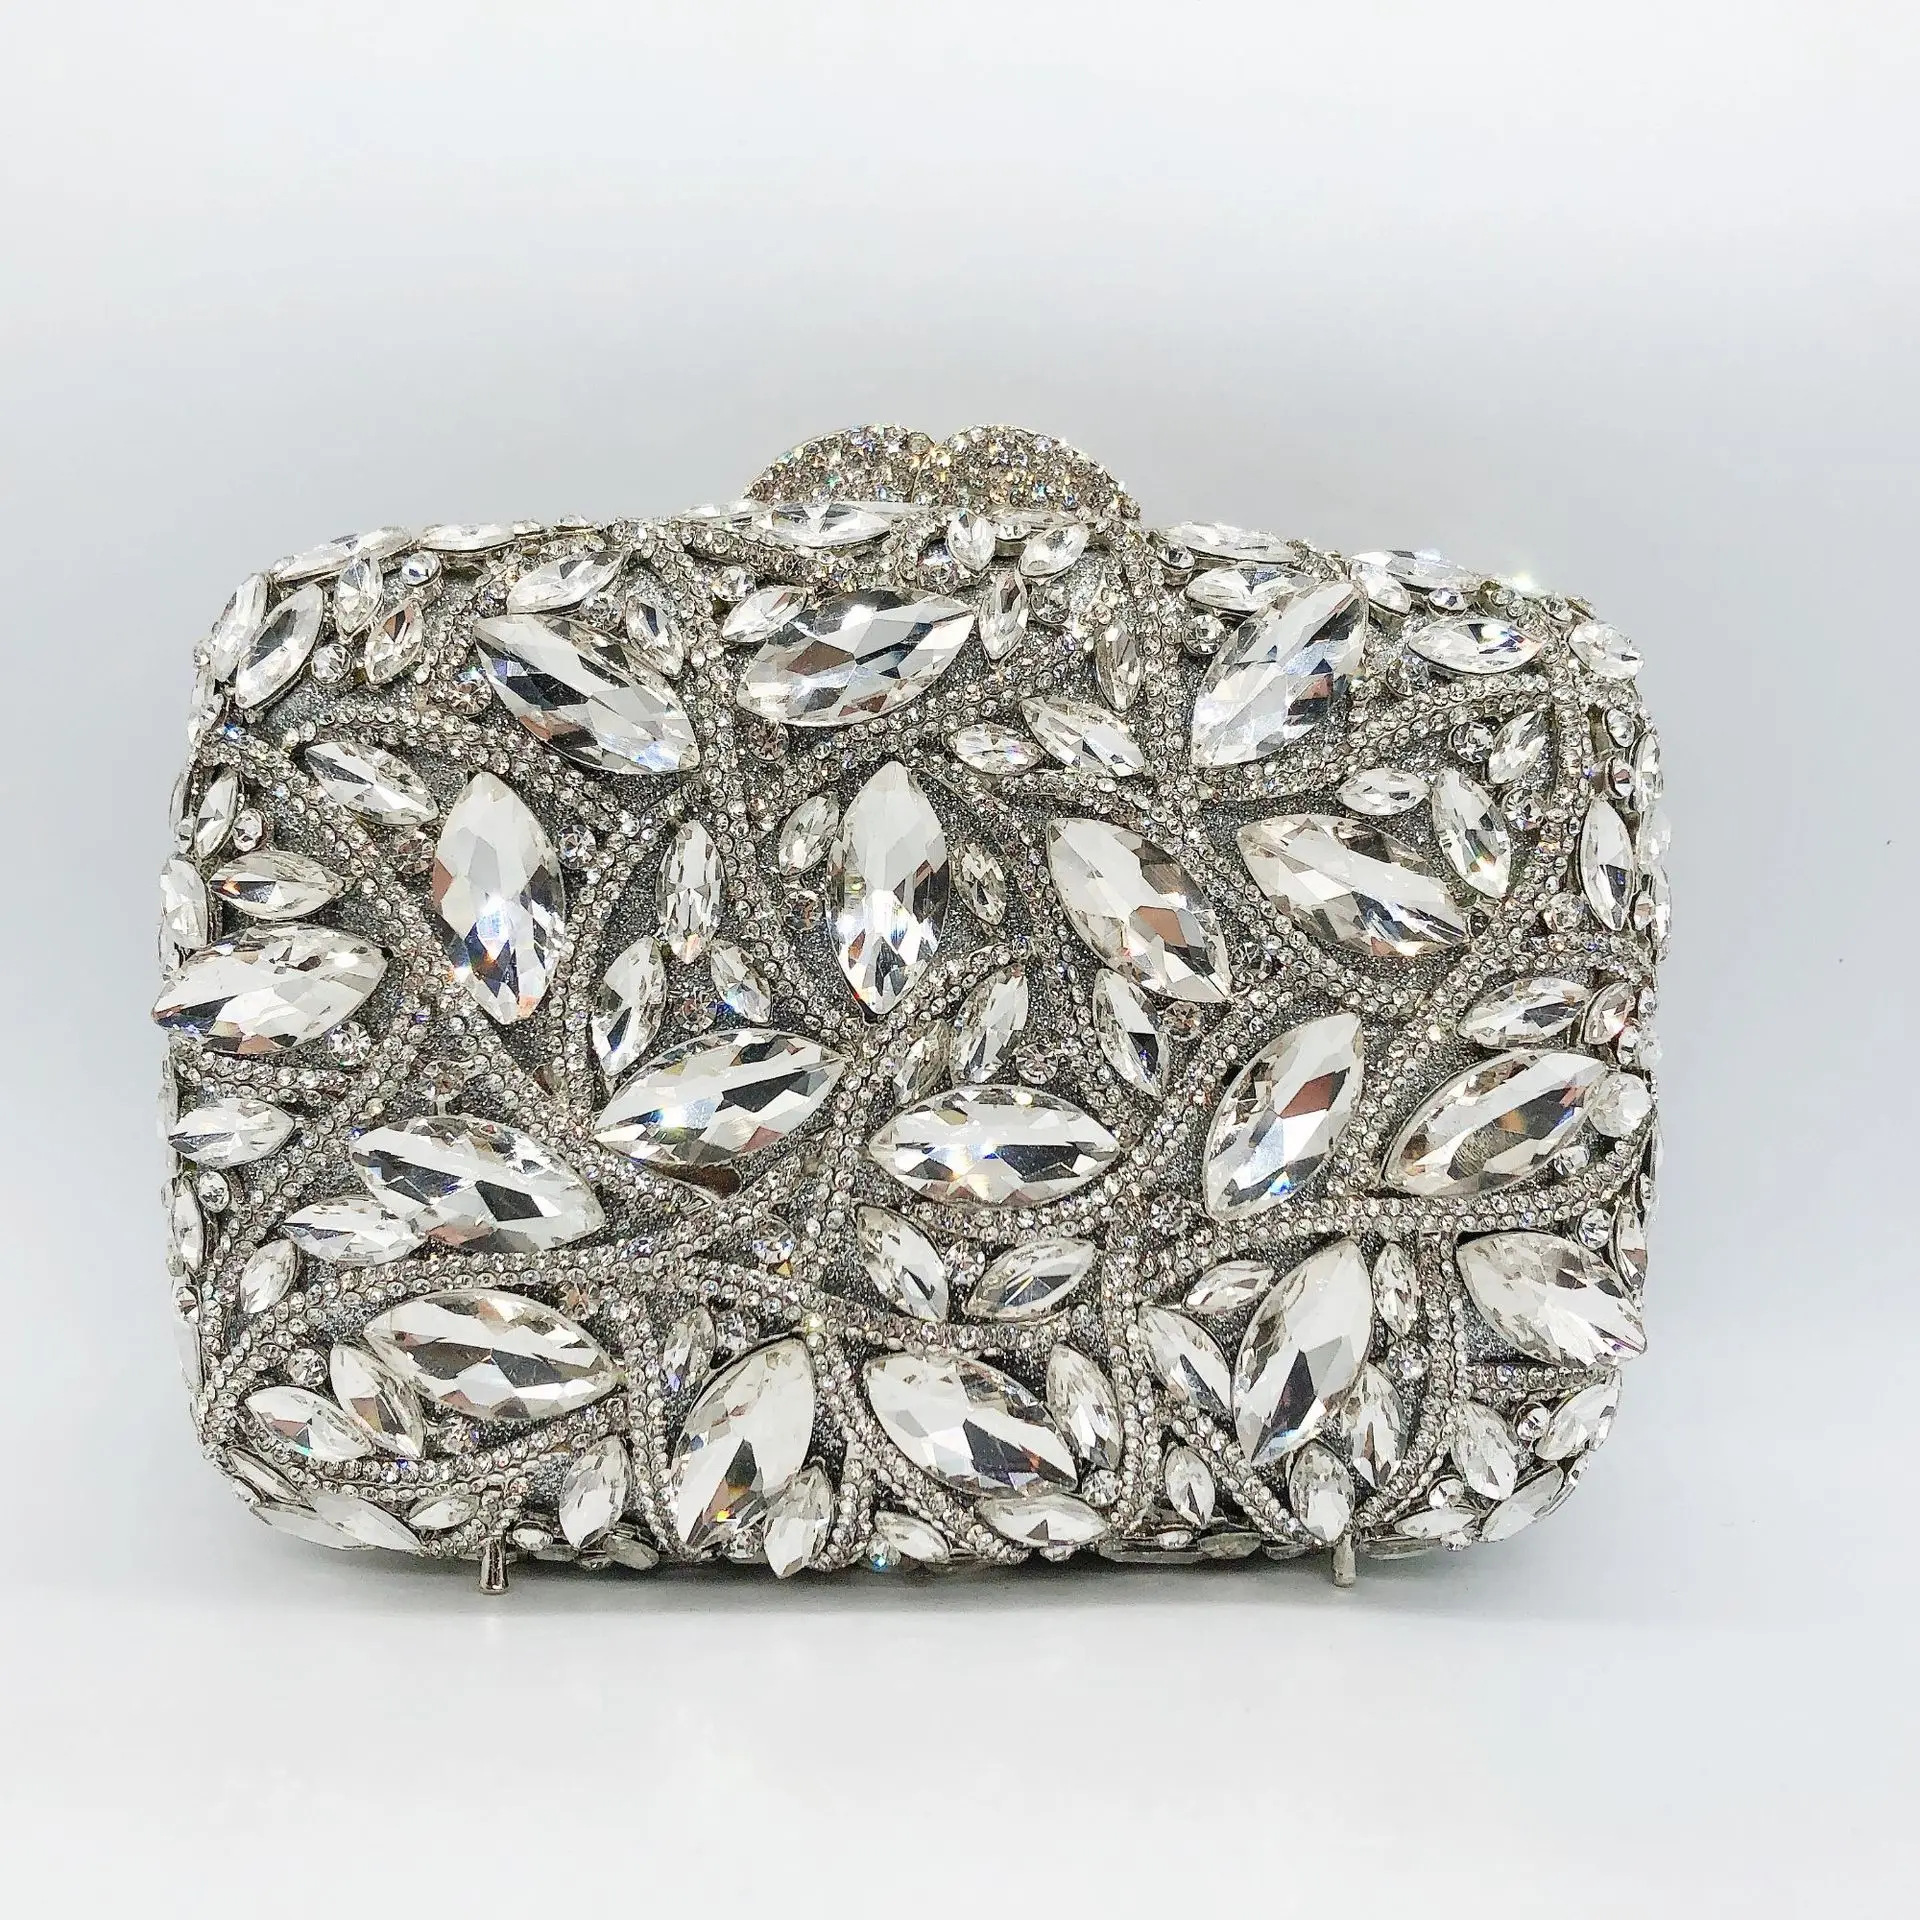 

Exquisite Hollow Out Rhinestone Evening Bag Luxurious Glass Crystal Handbag Shiny Diamond Party Prom Clutch Purse for Women